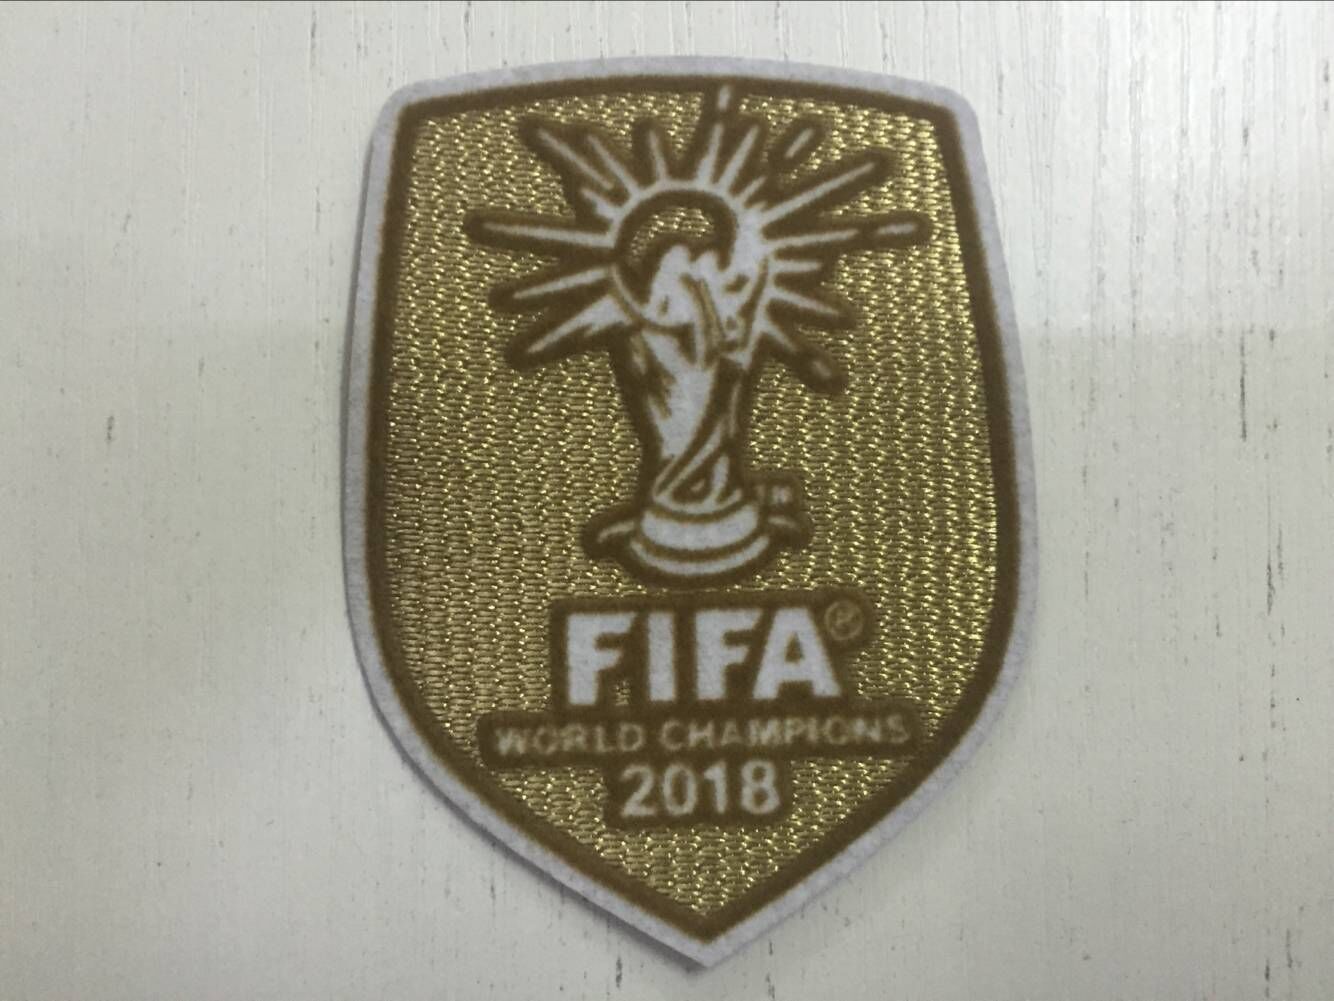 World Cup Champions 2018